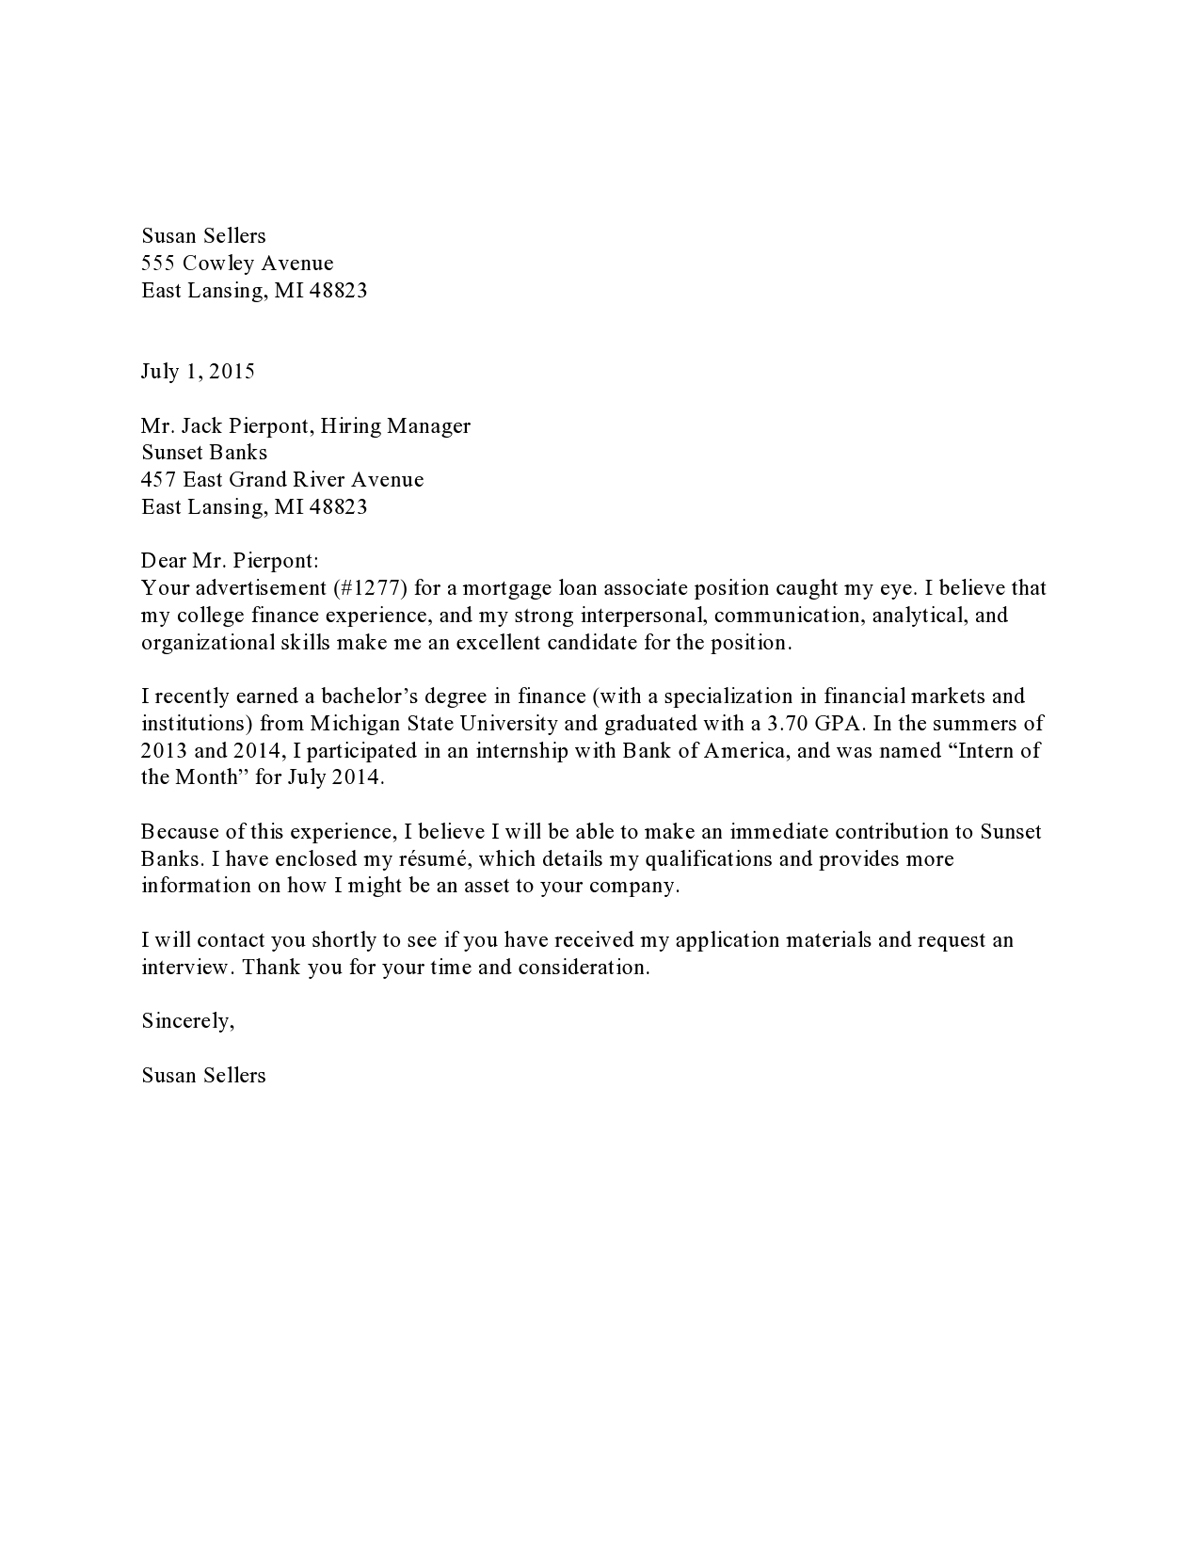 Samples Of Cover Letter  Commercial Banking Entry Level Response To Ad Letter Cover Letter